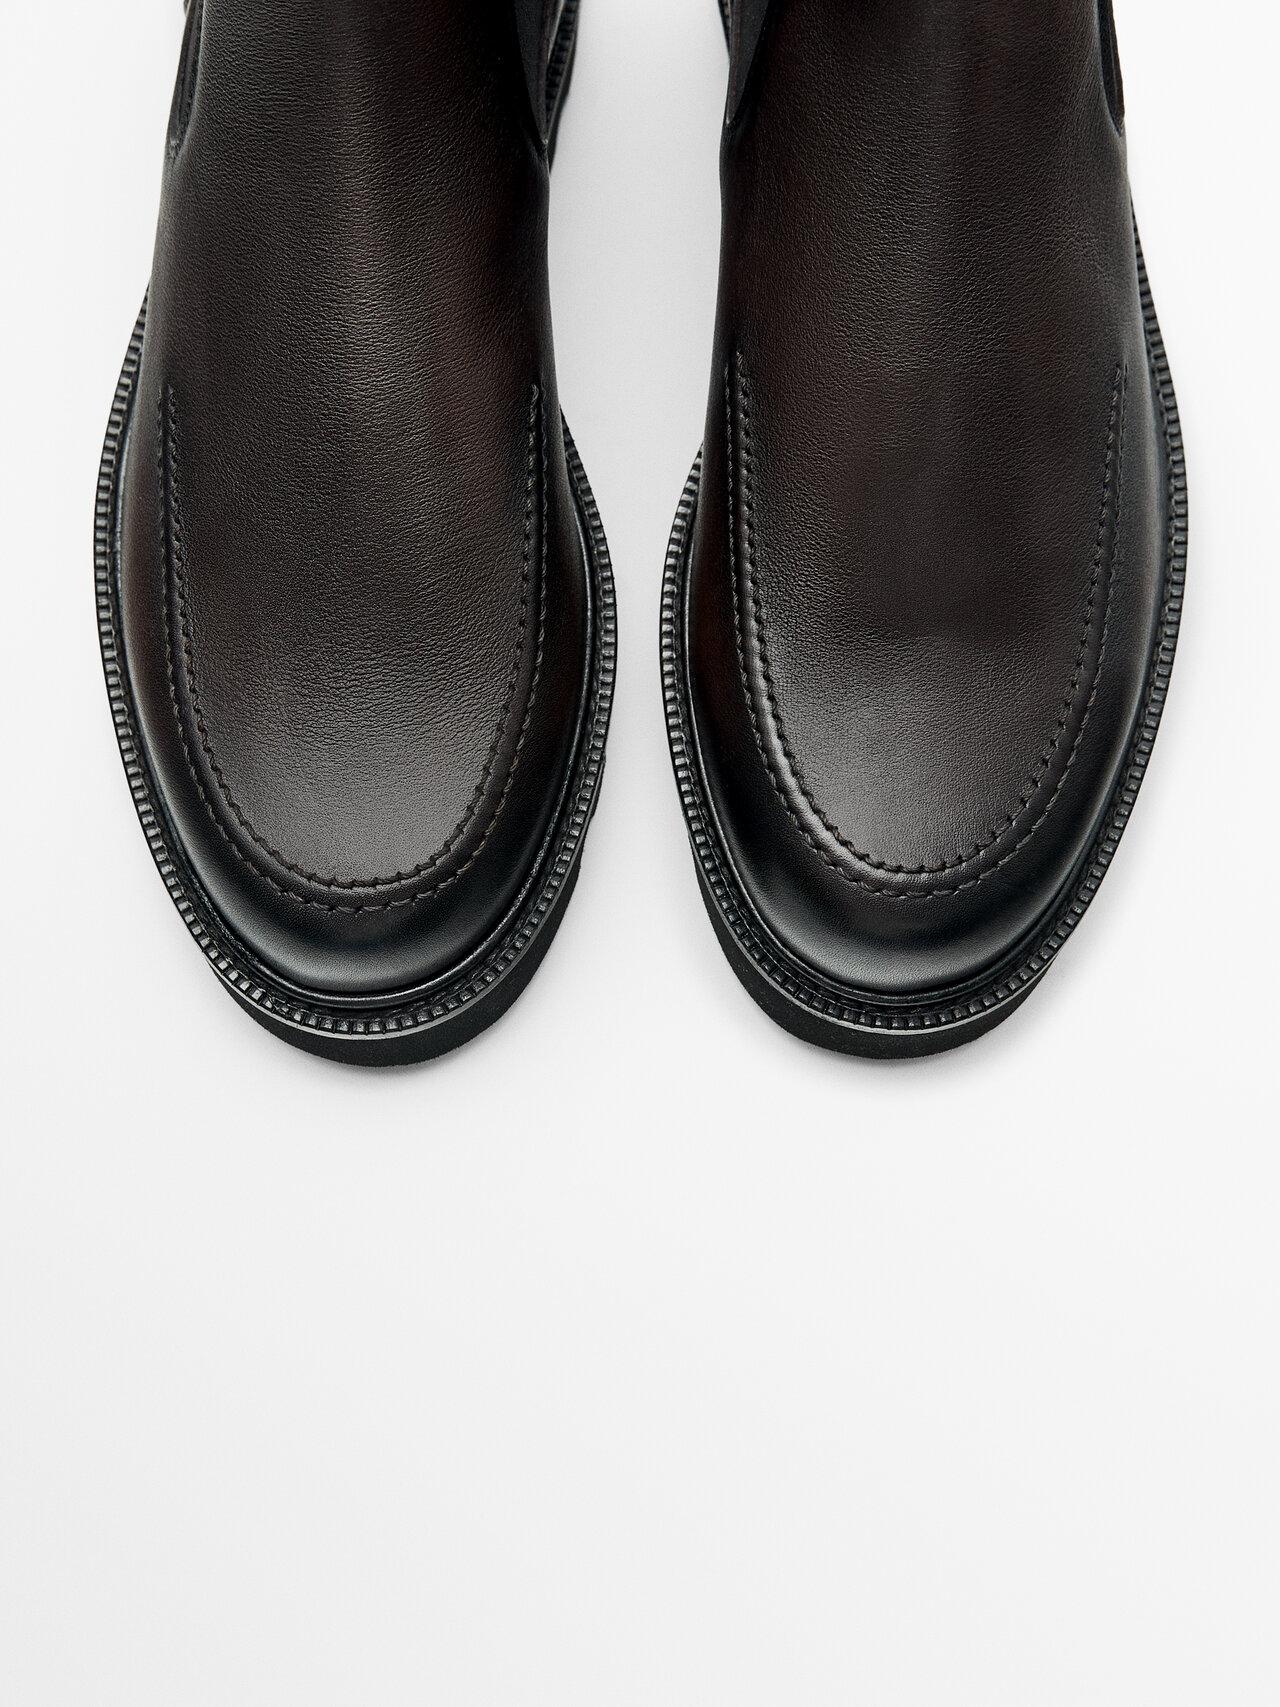 MASSIMO DUTTI Moc Toe Chelsea Boots in Black for Men | Lyst